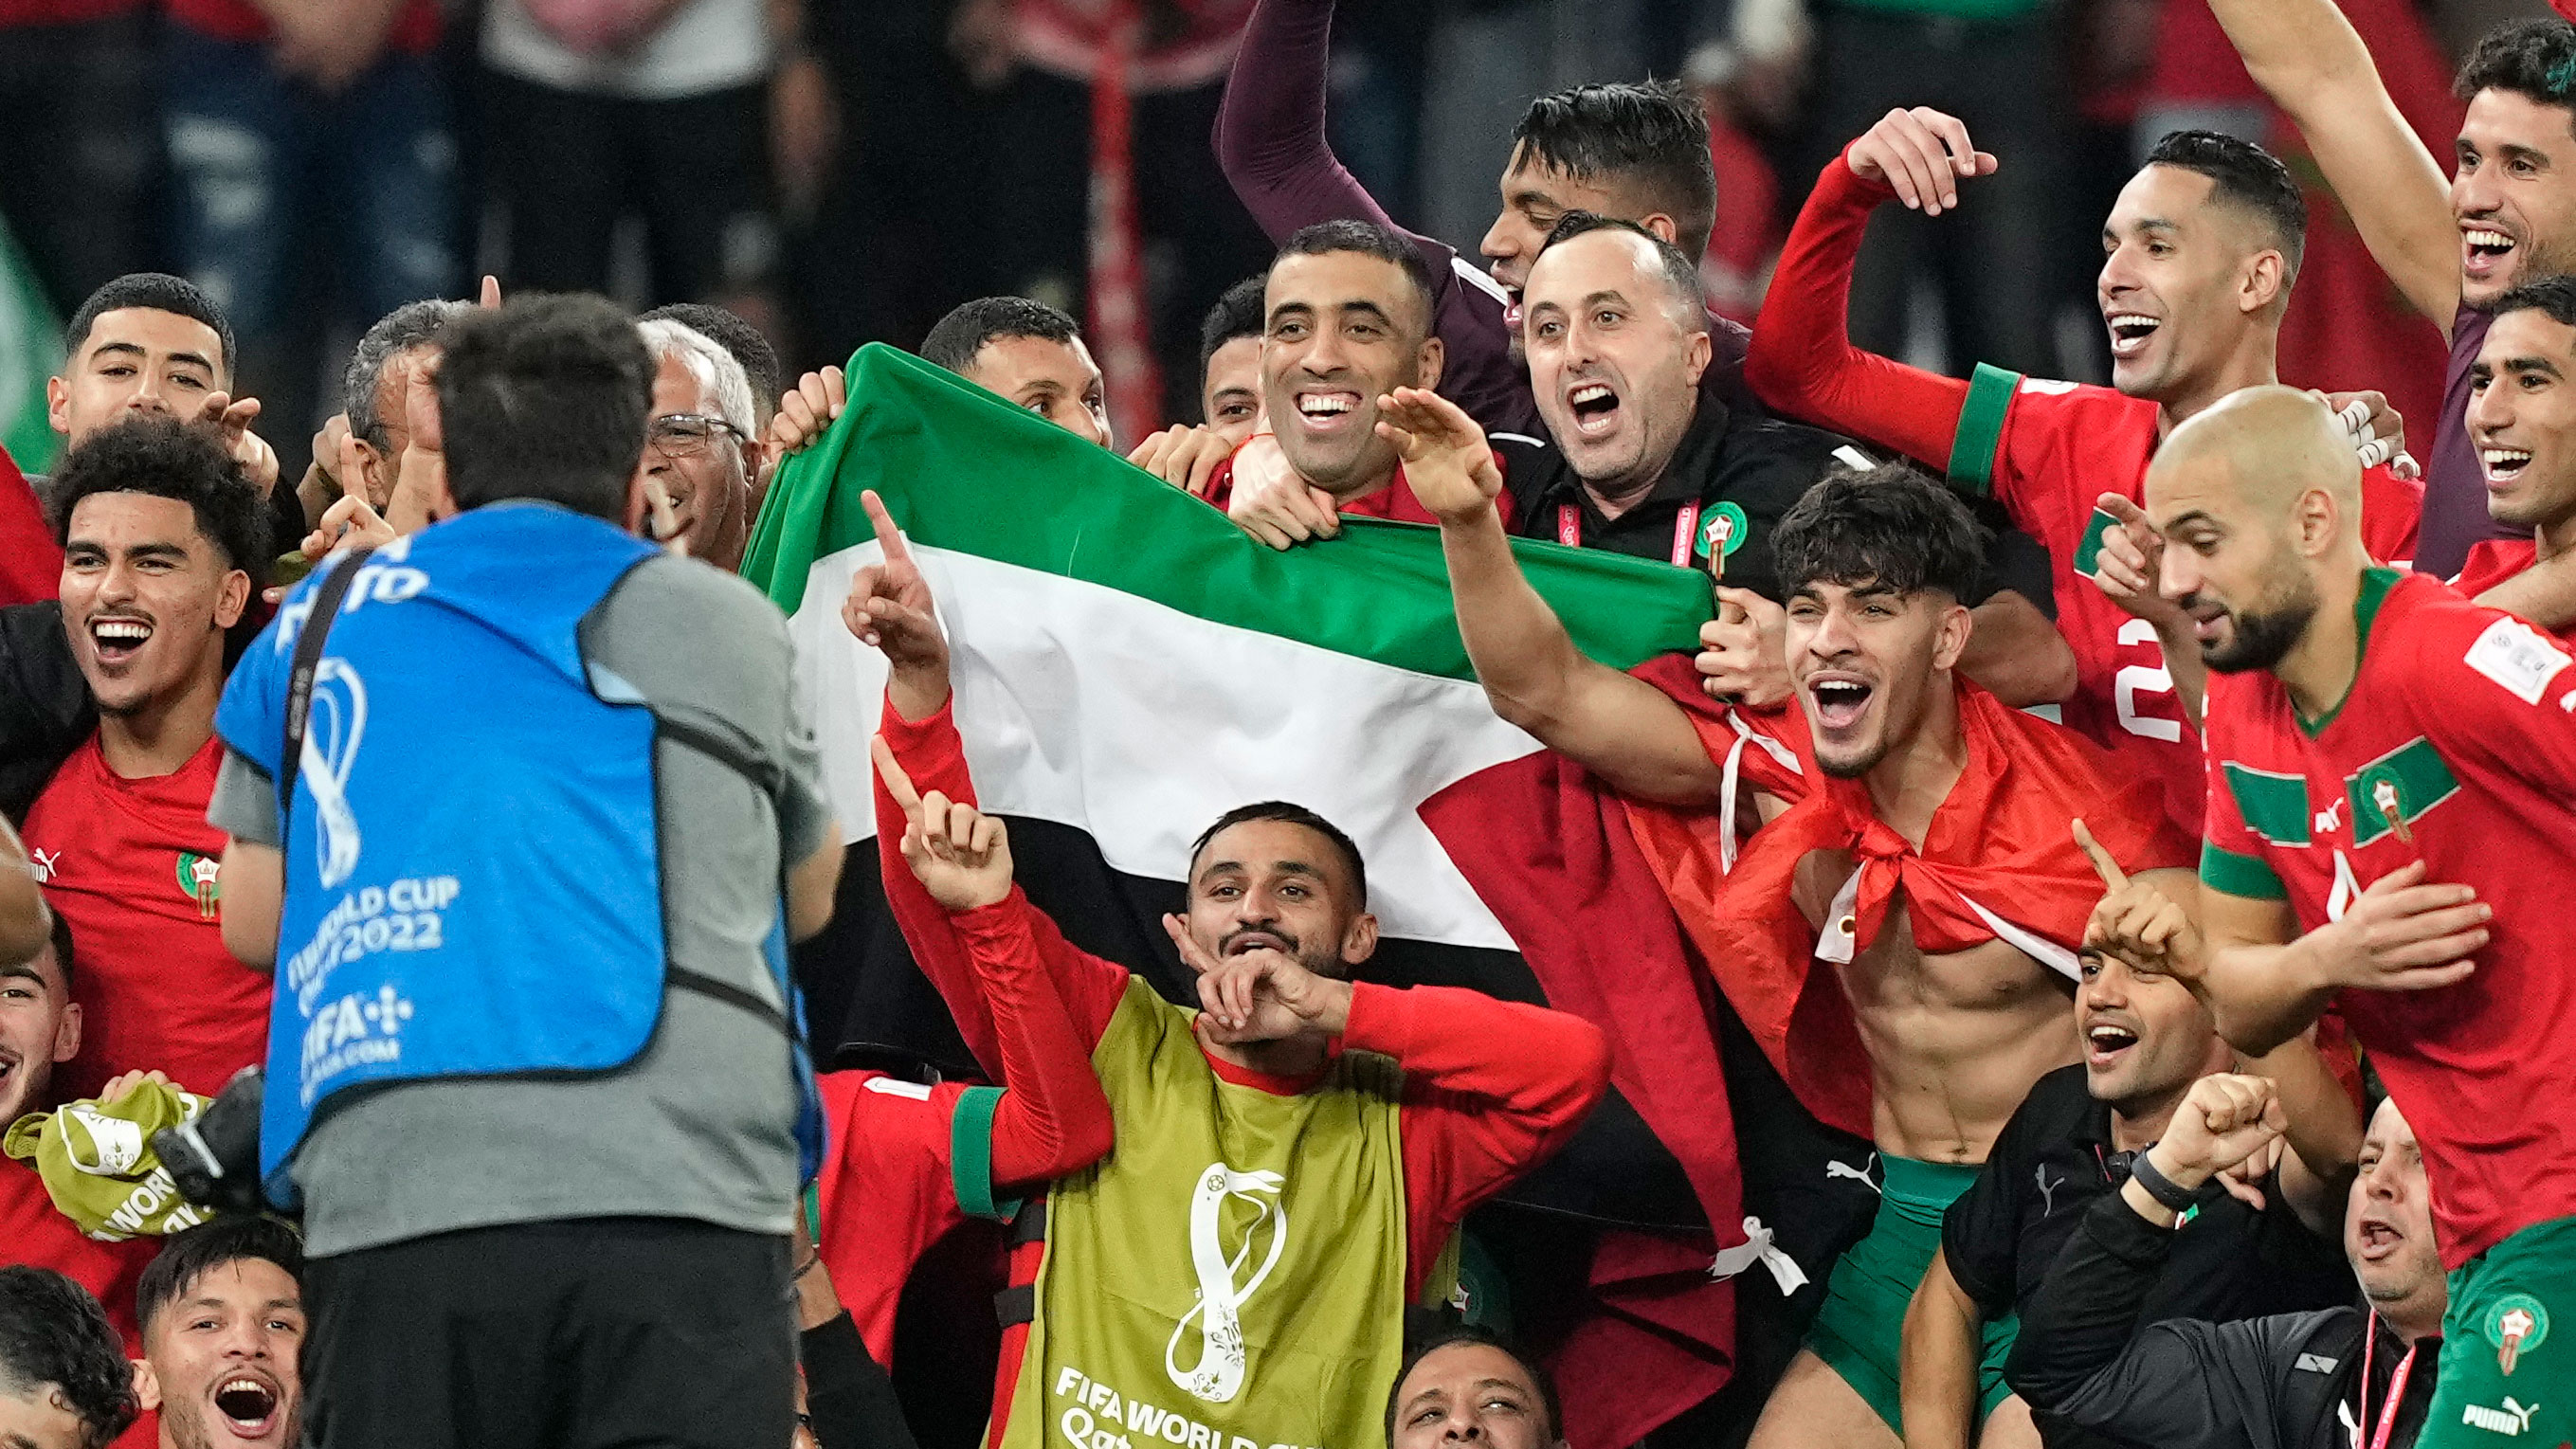 Morocco's team takes a group photo on the pitch holding the Palestinian flag after defeating Spain on December 6.